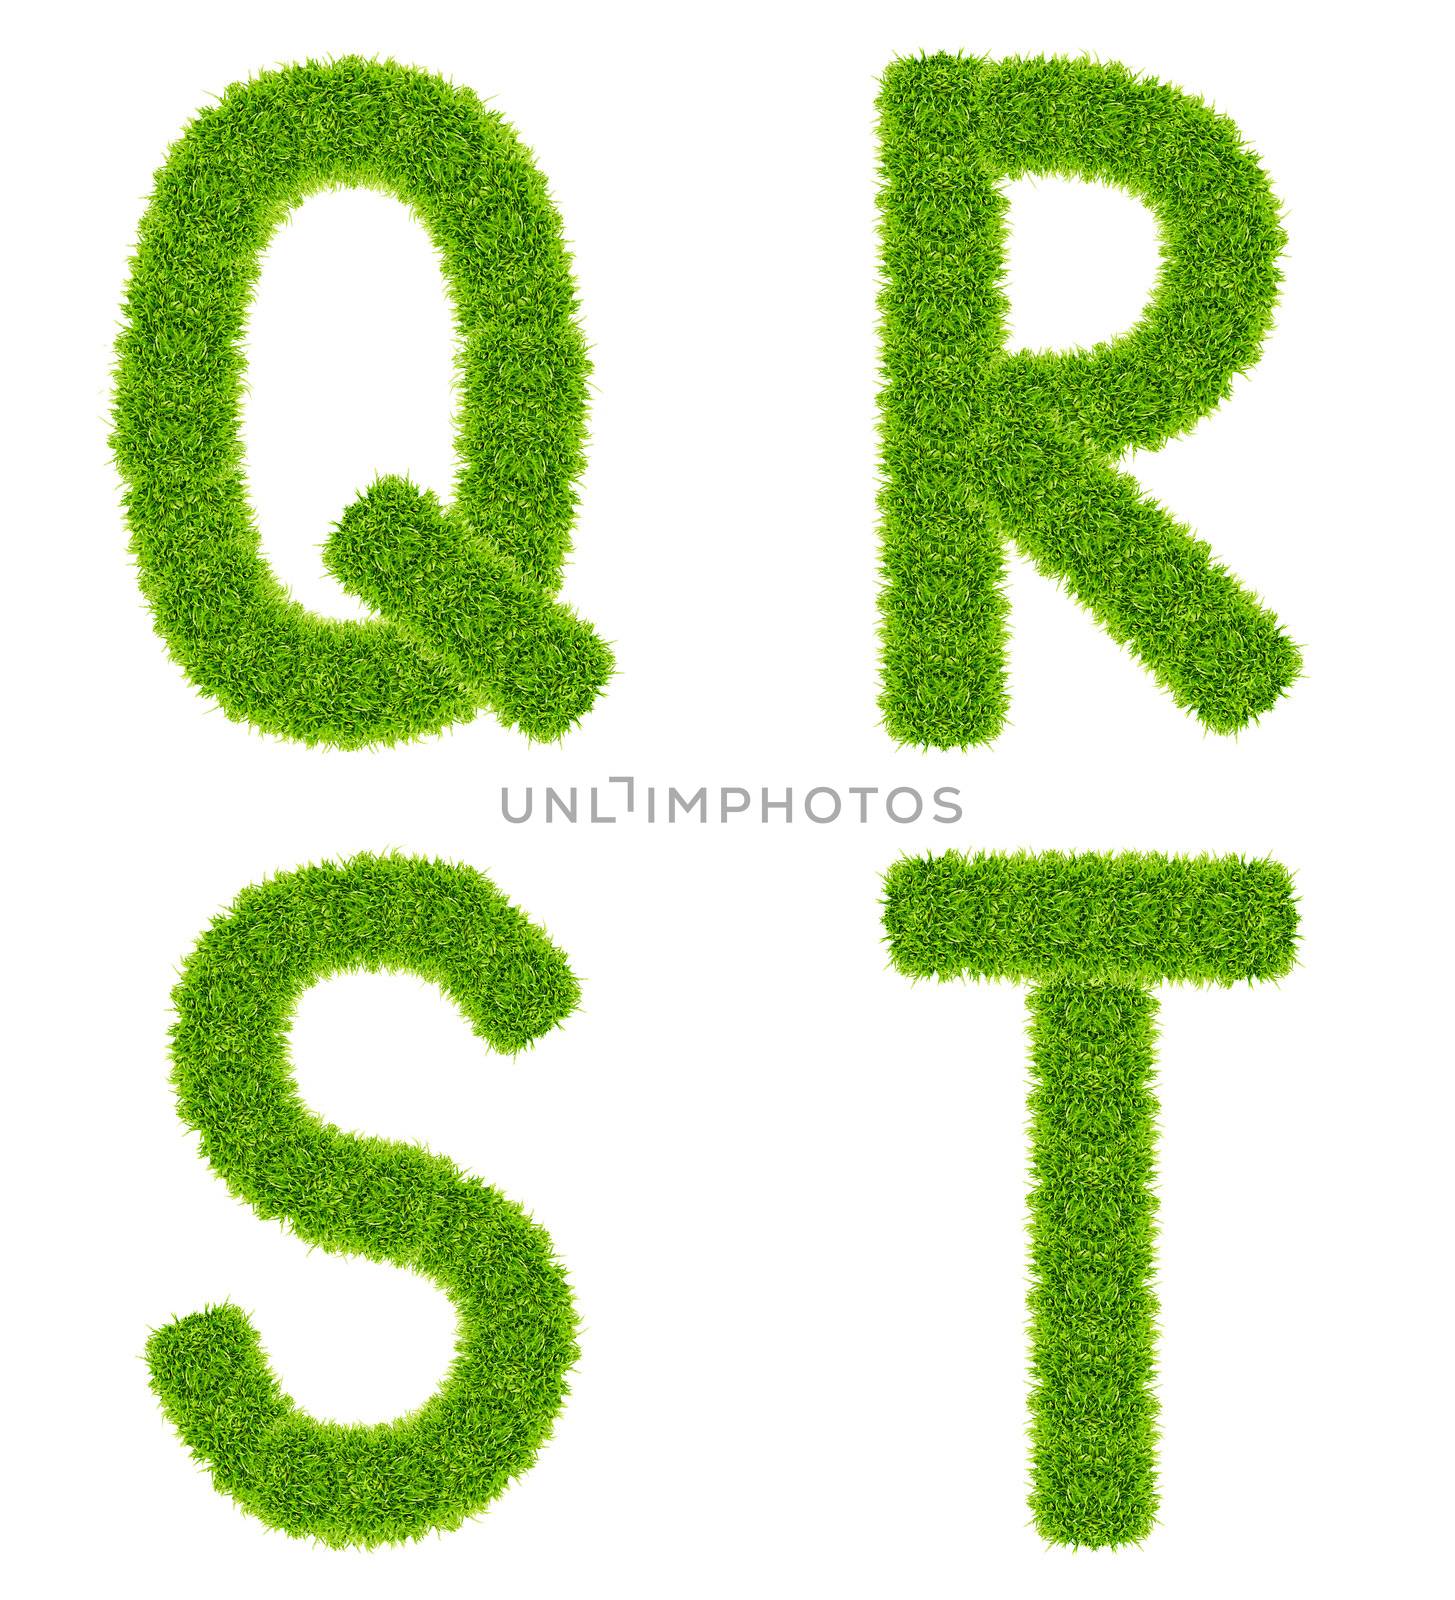 green grass letter qrst isolated